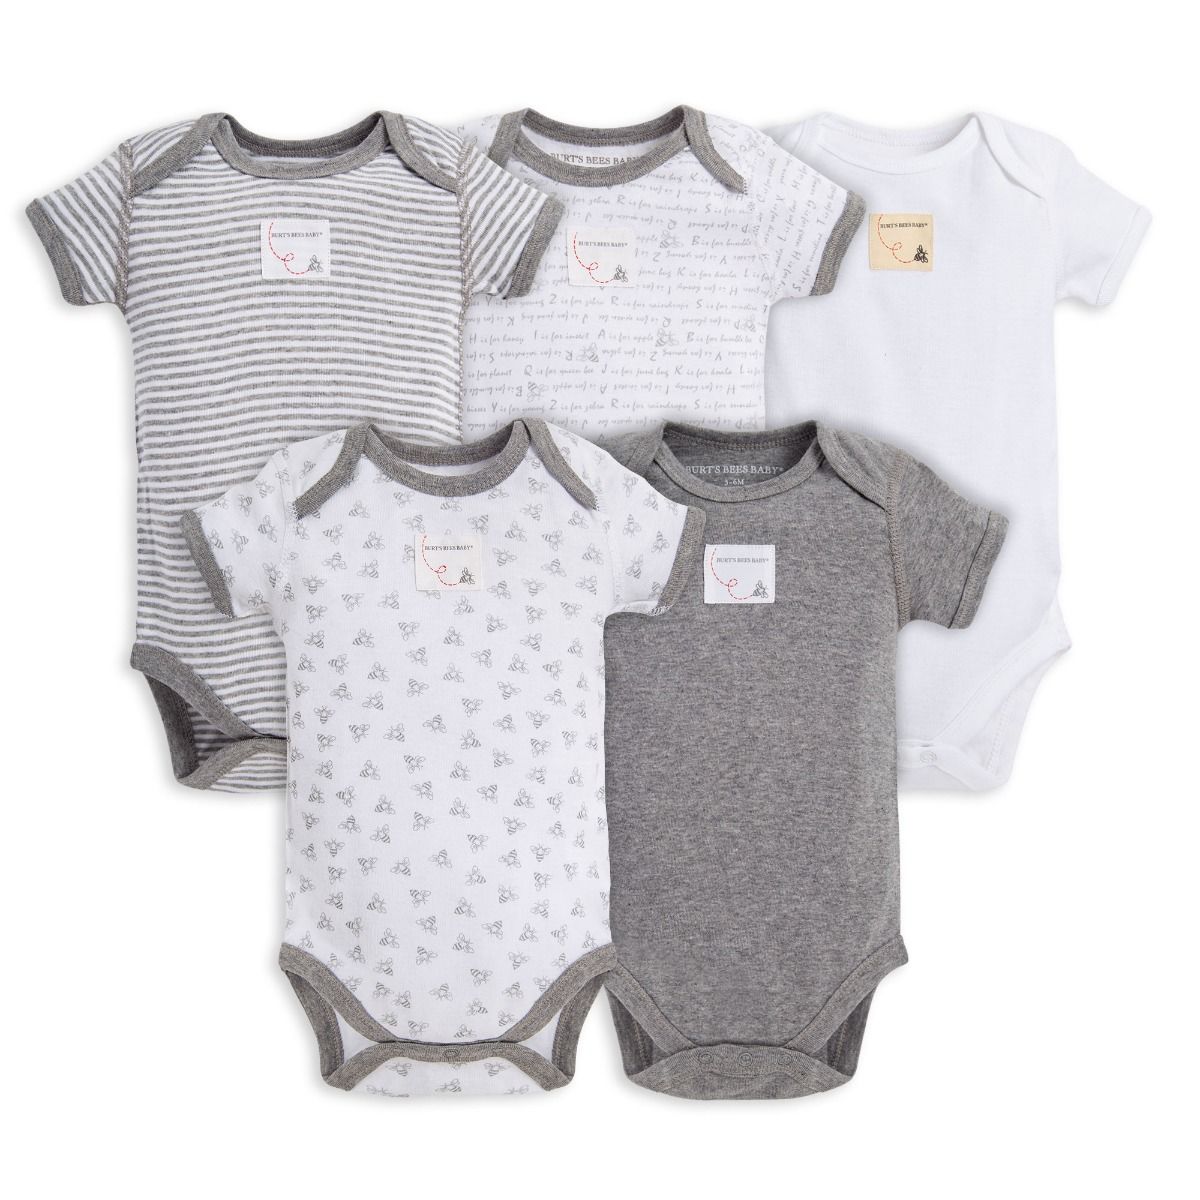 Baby Body suits